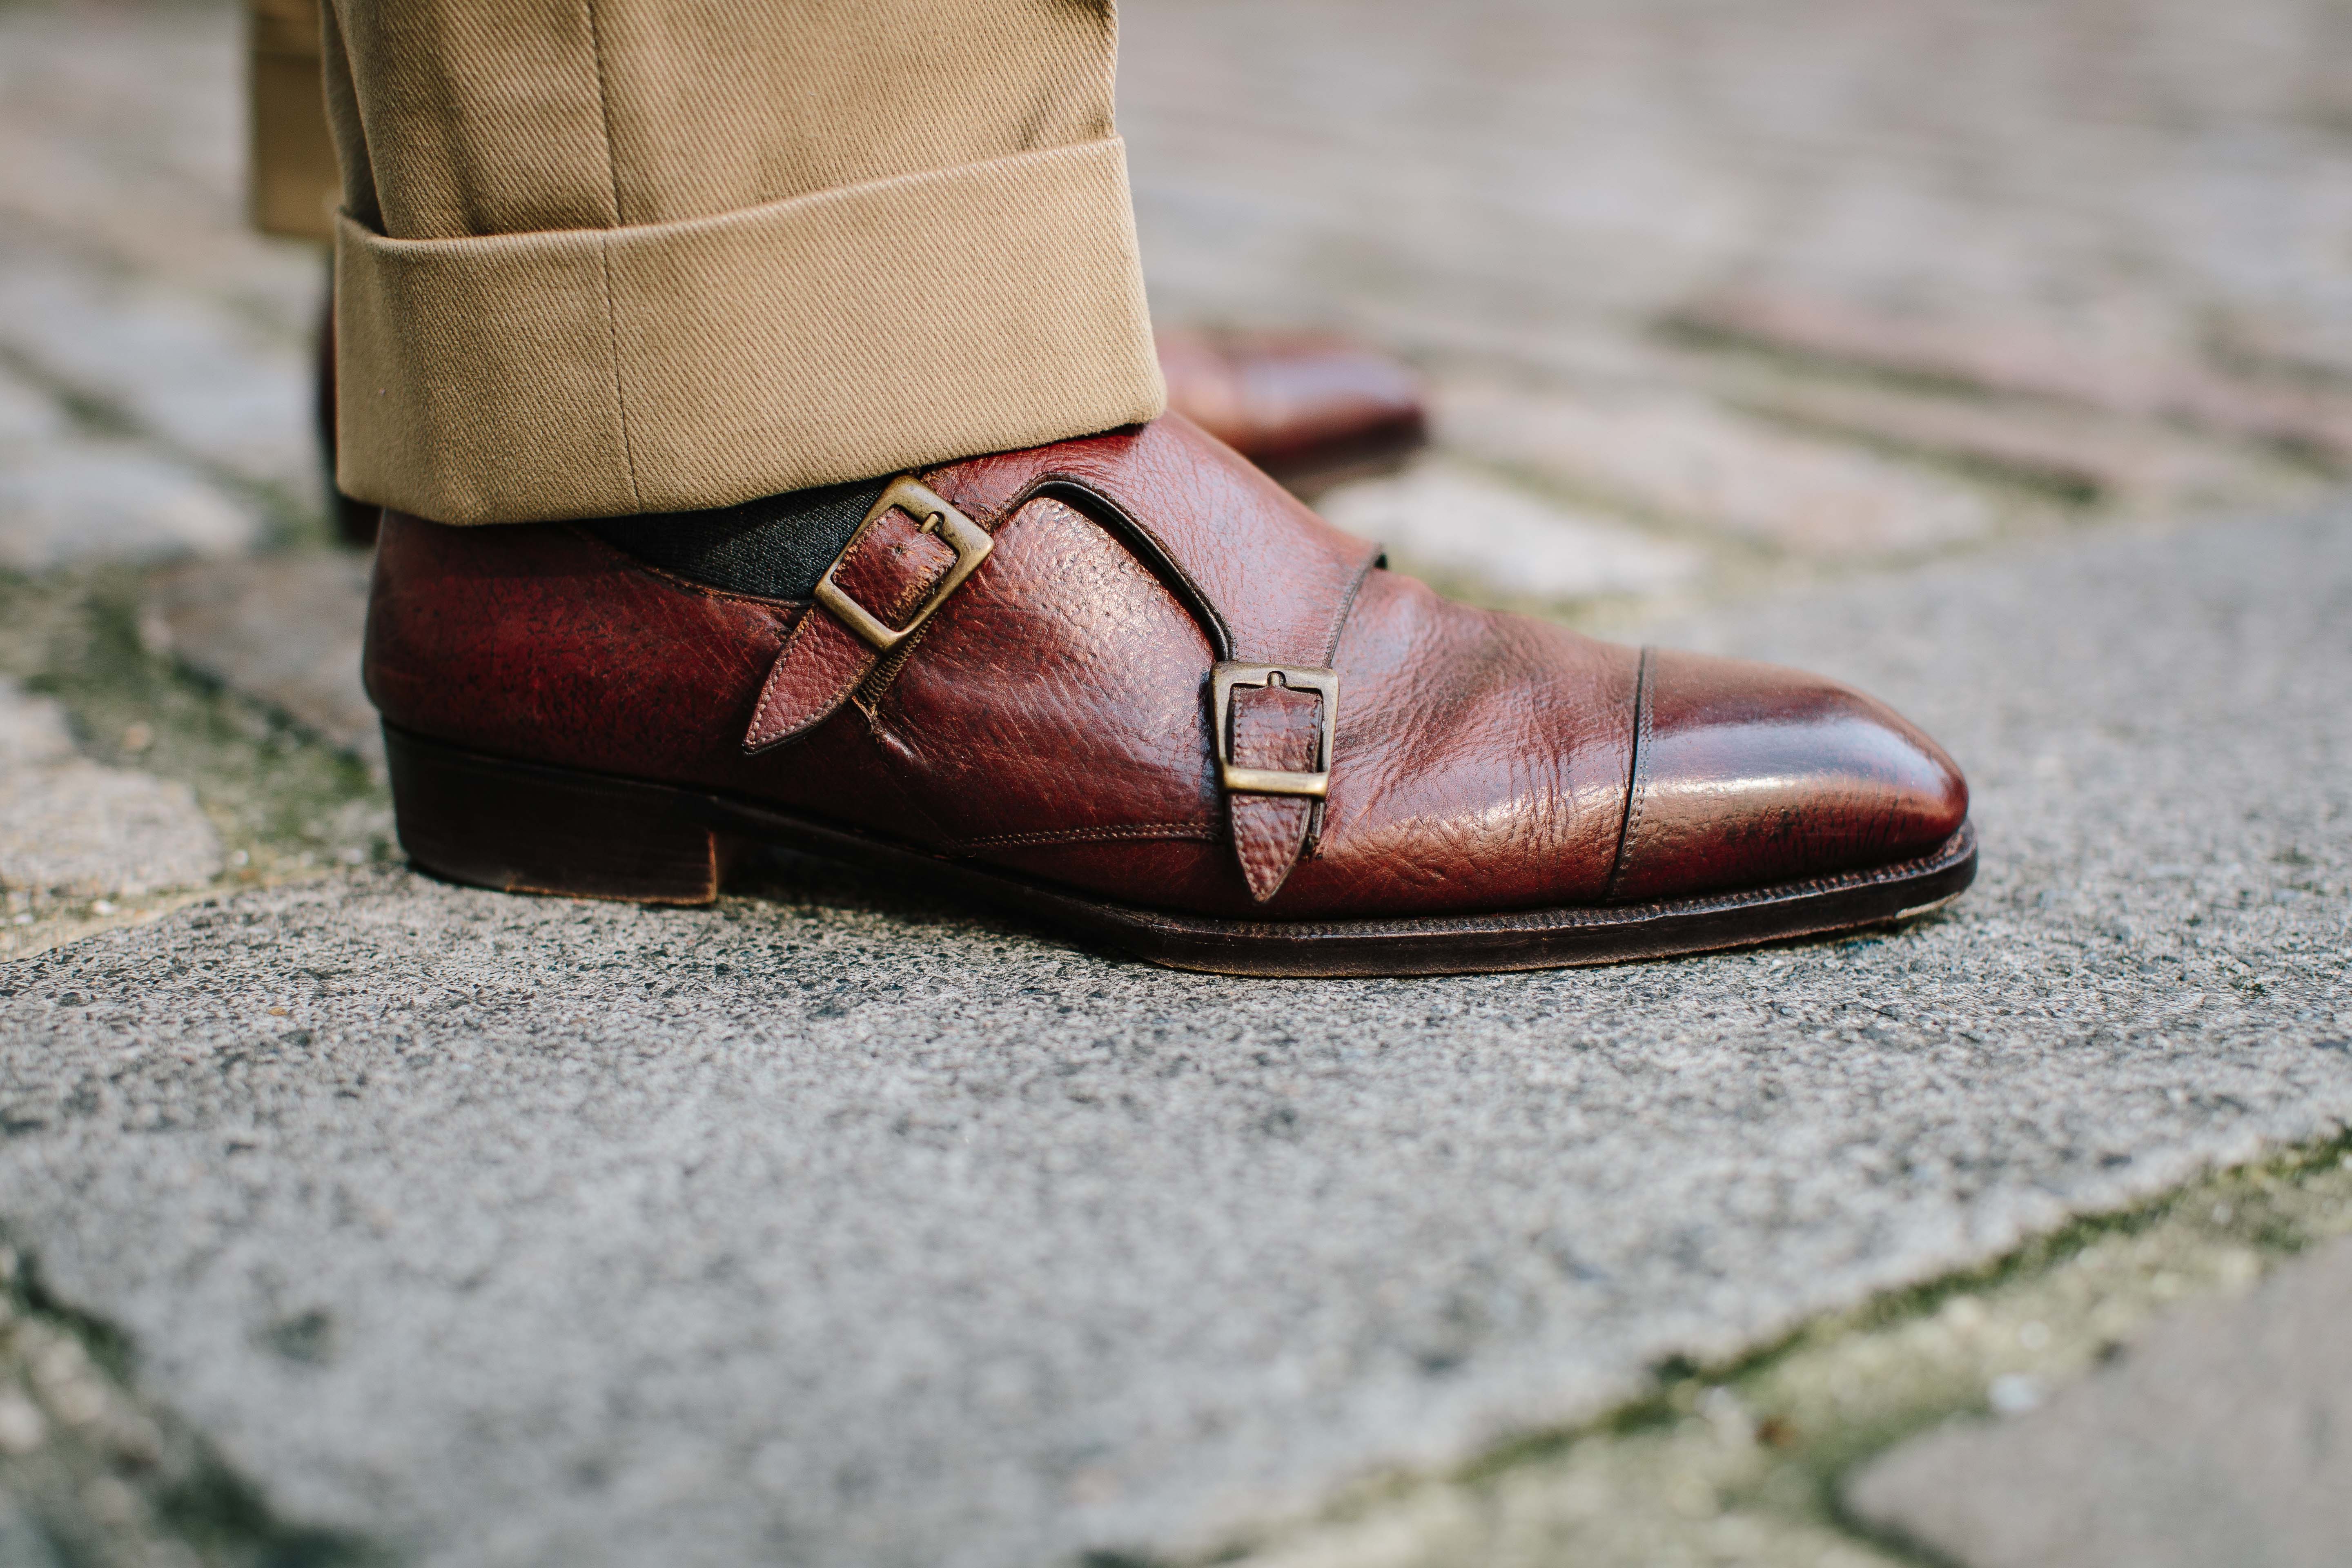 5 Rules For Buying Men's Dress Shoes - The Shoe Snob Blog